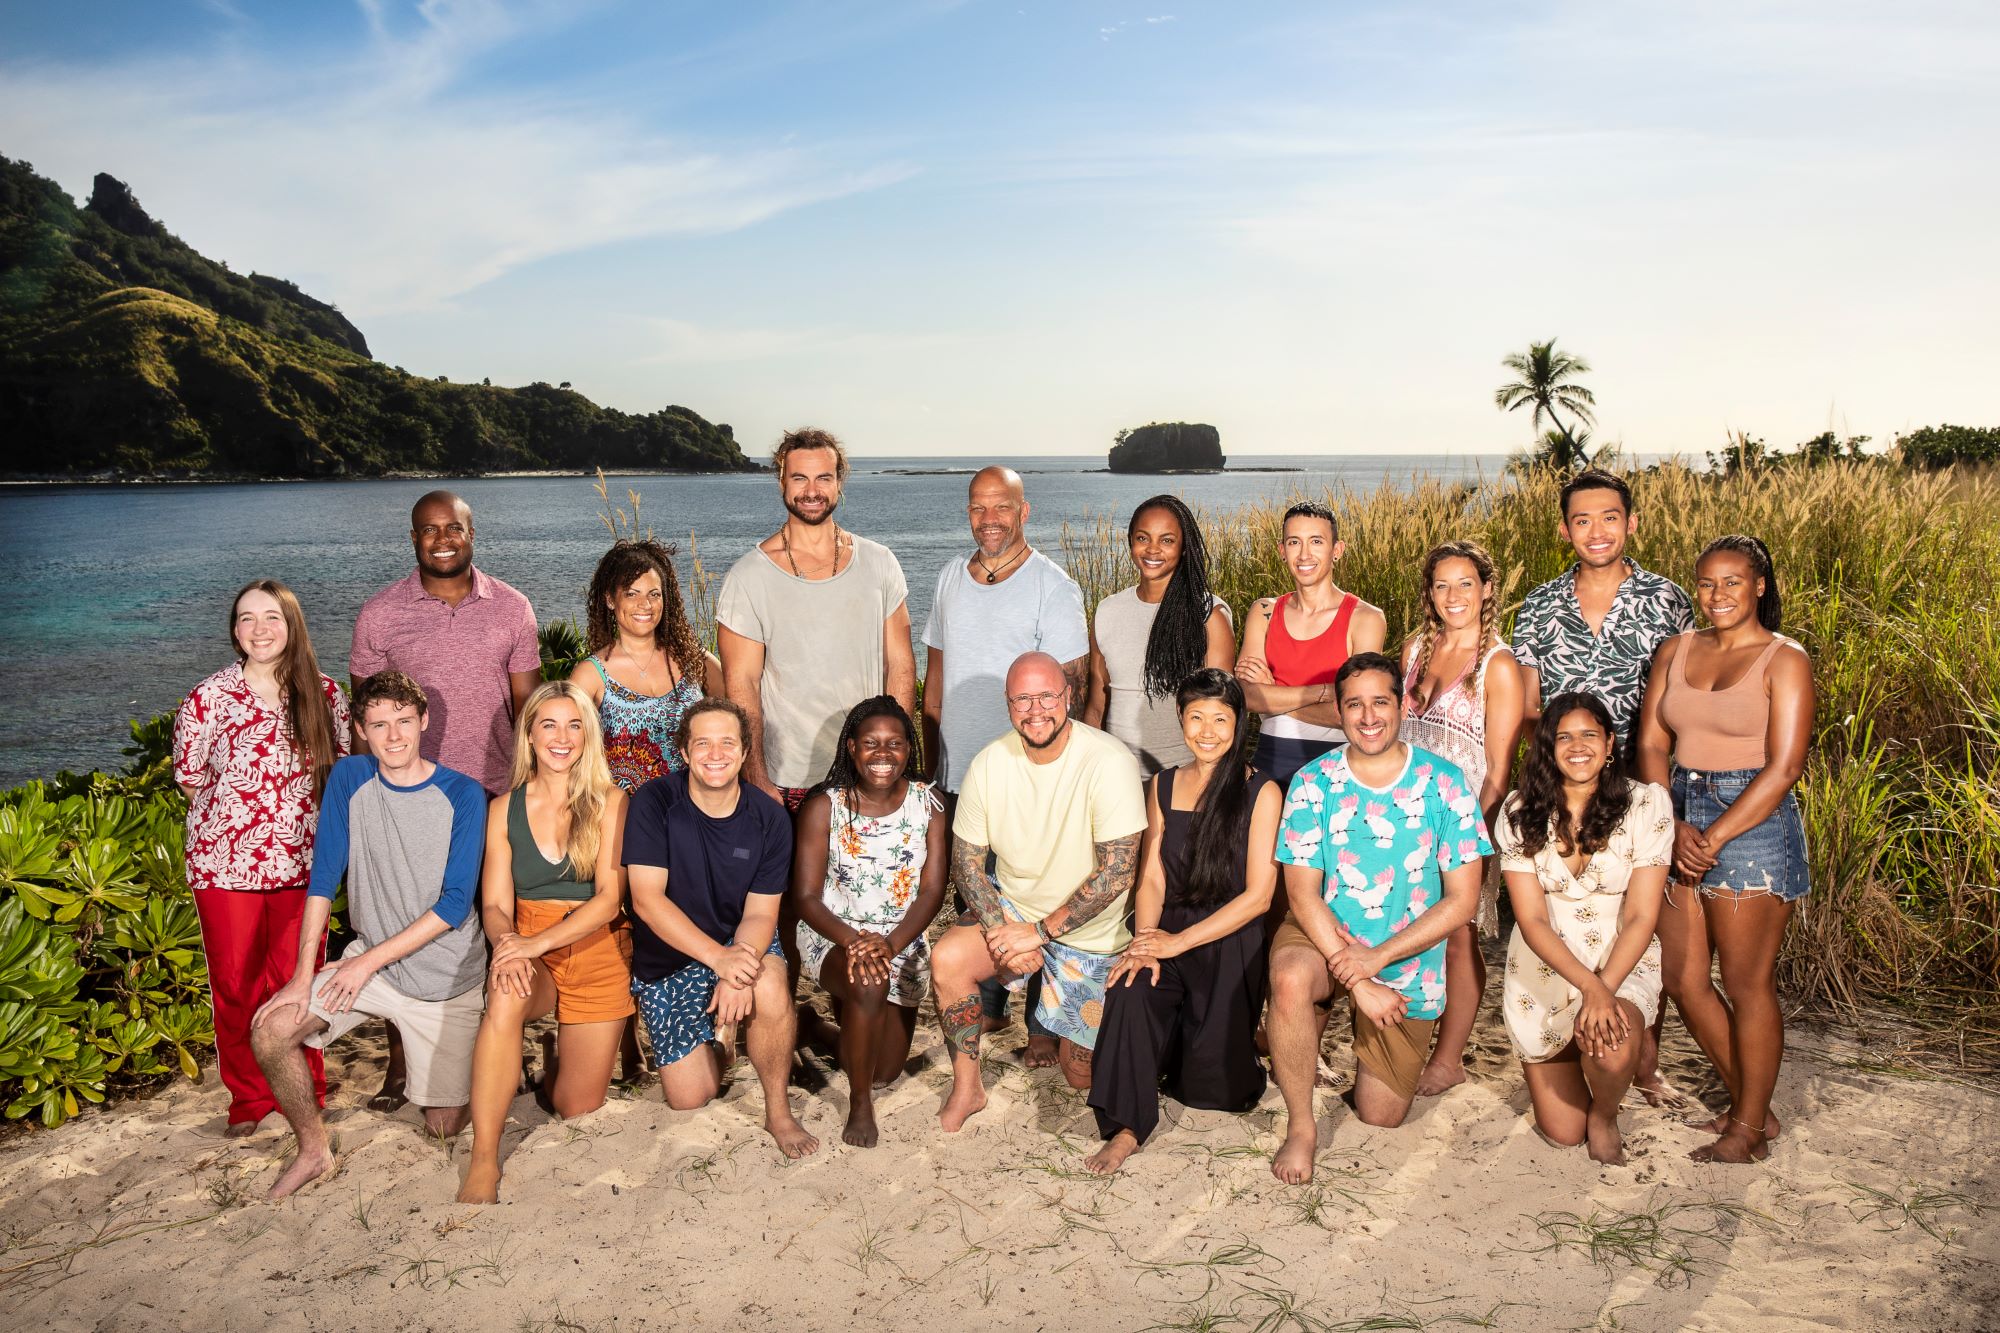 The 'Survivor' Season 42 castaways pose for promotional pictures on the beach. Ten contestants stand in the back row, and the eight other players kneel in the front row.